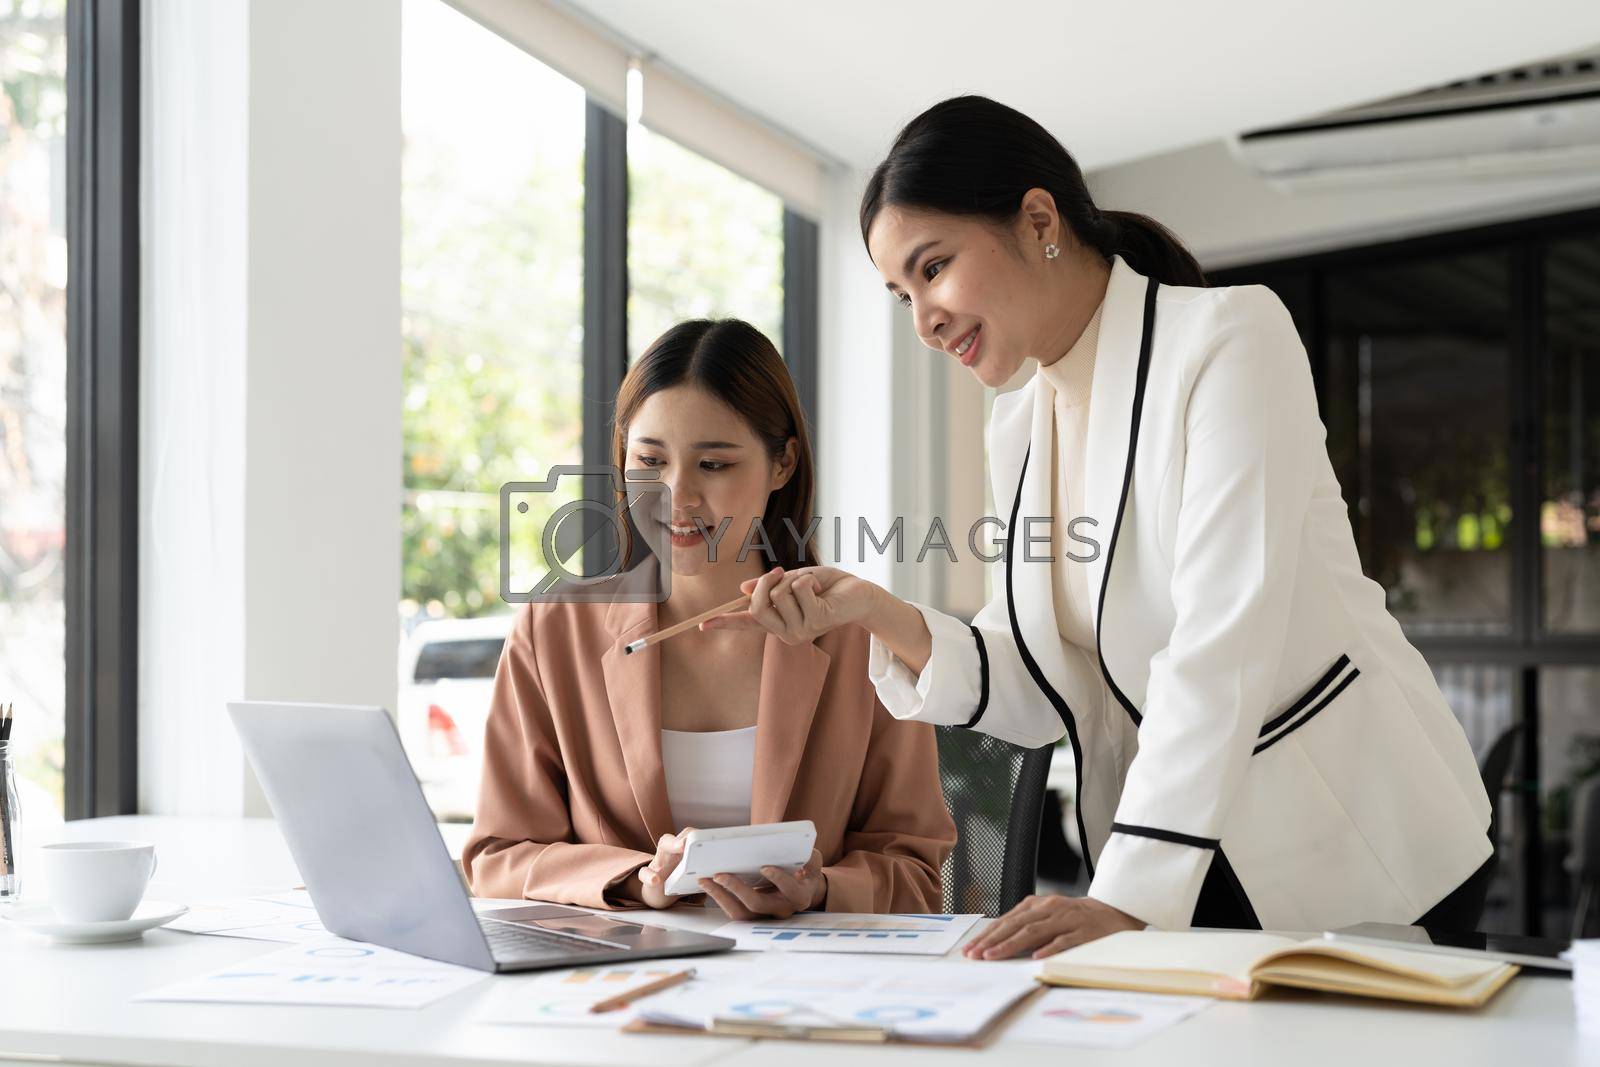 Royalty free image of Young businesswoman adviser standing in front of laptop and giving advise to sales woman. Business people consulting at office. by nateemee